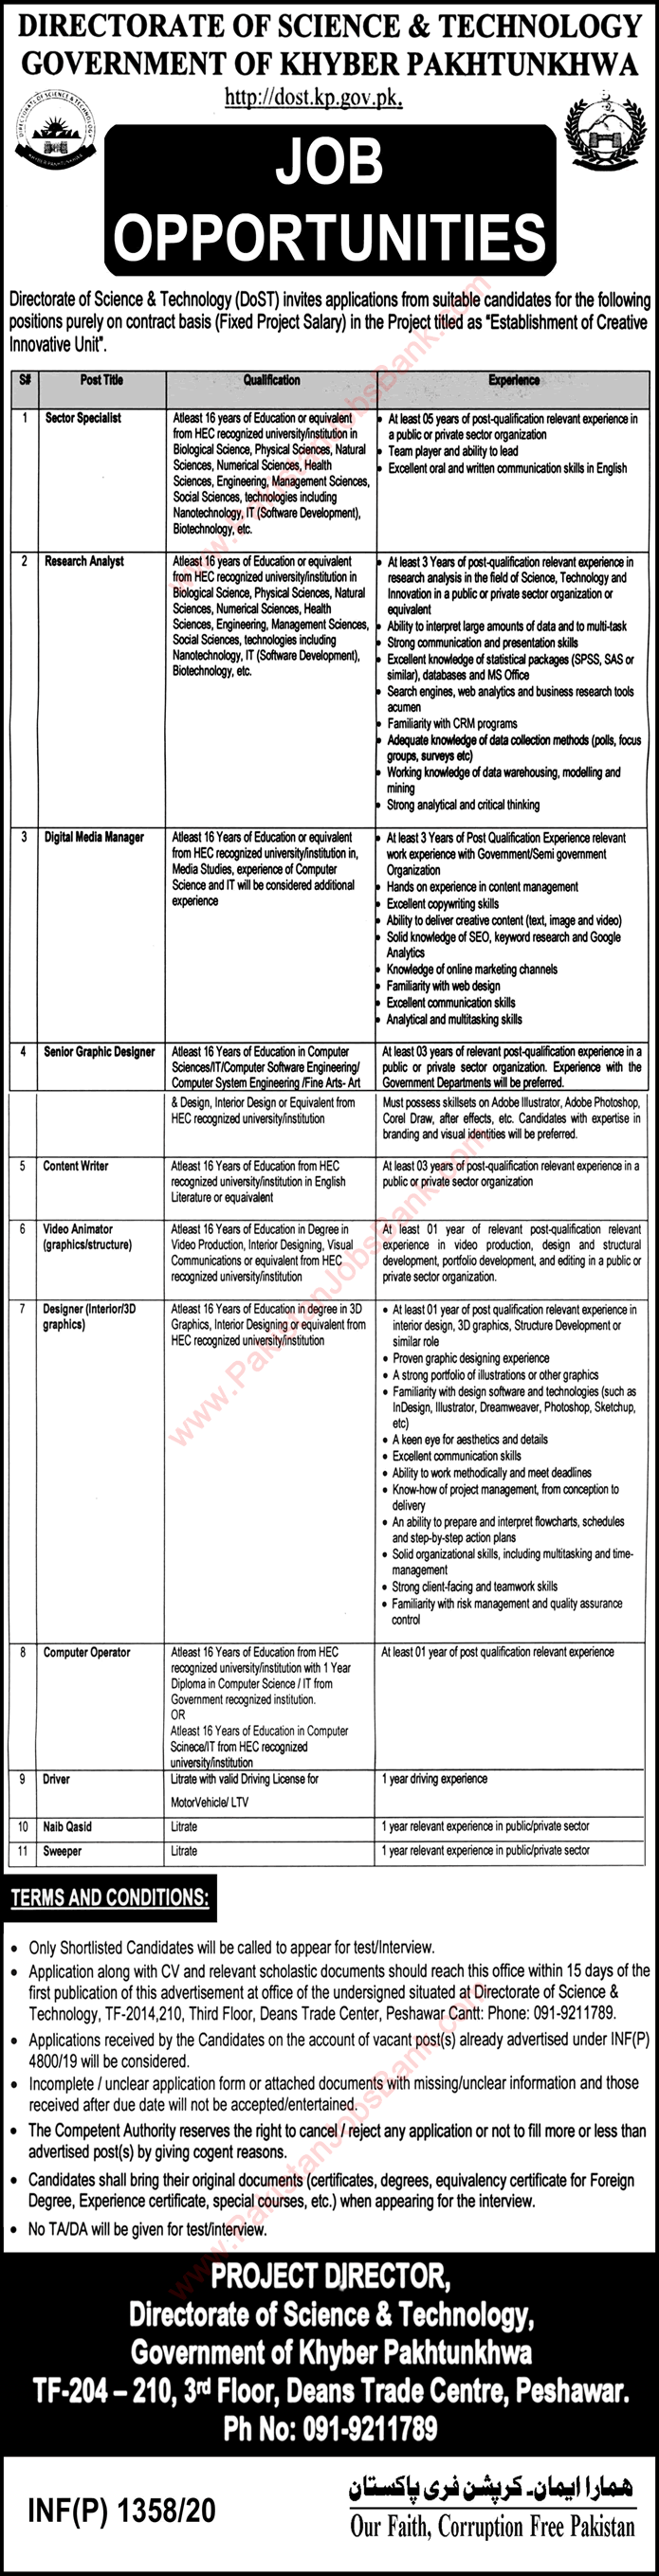 Directorate of Science and Technology KPK Jobs 2020 April Computer Operator, Graphic Designer & Others Latest